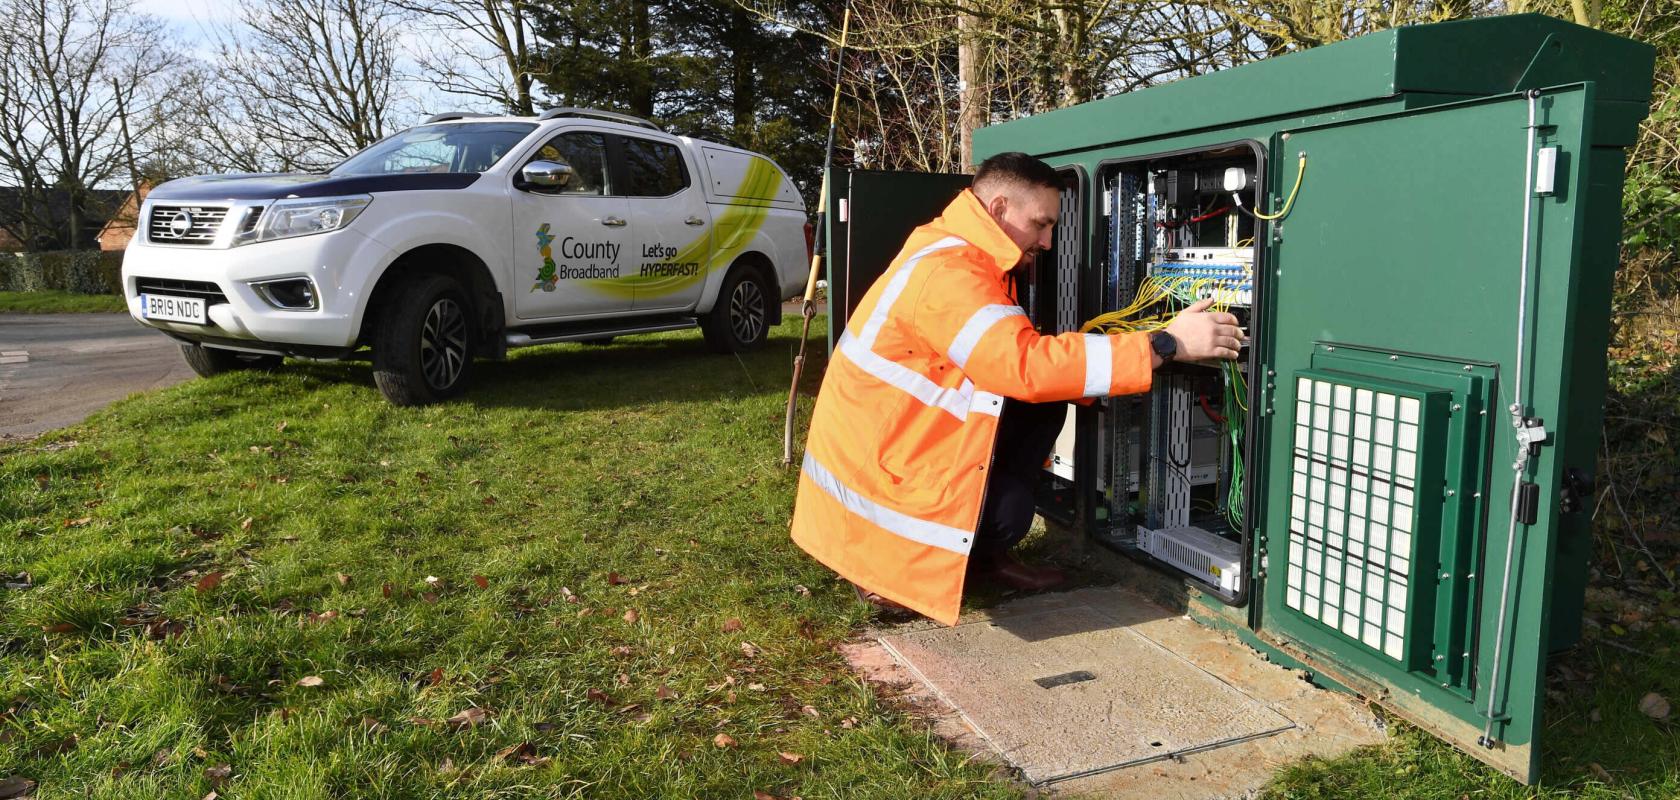 County Broadband has completed the build of its FTTH network in Sudbury